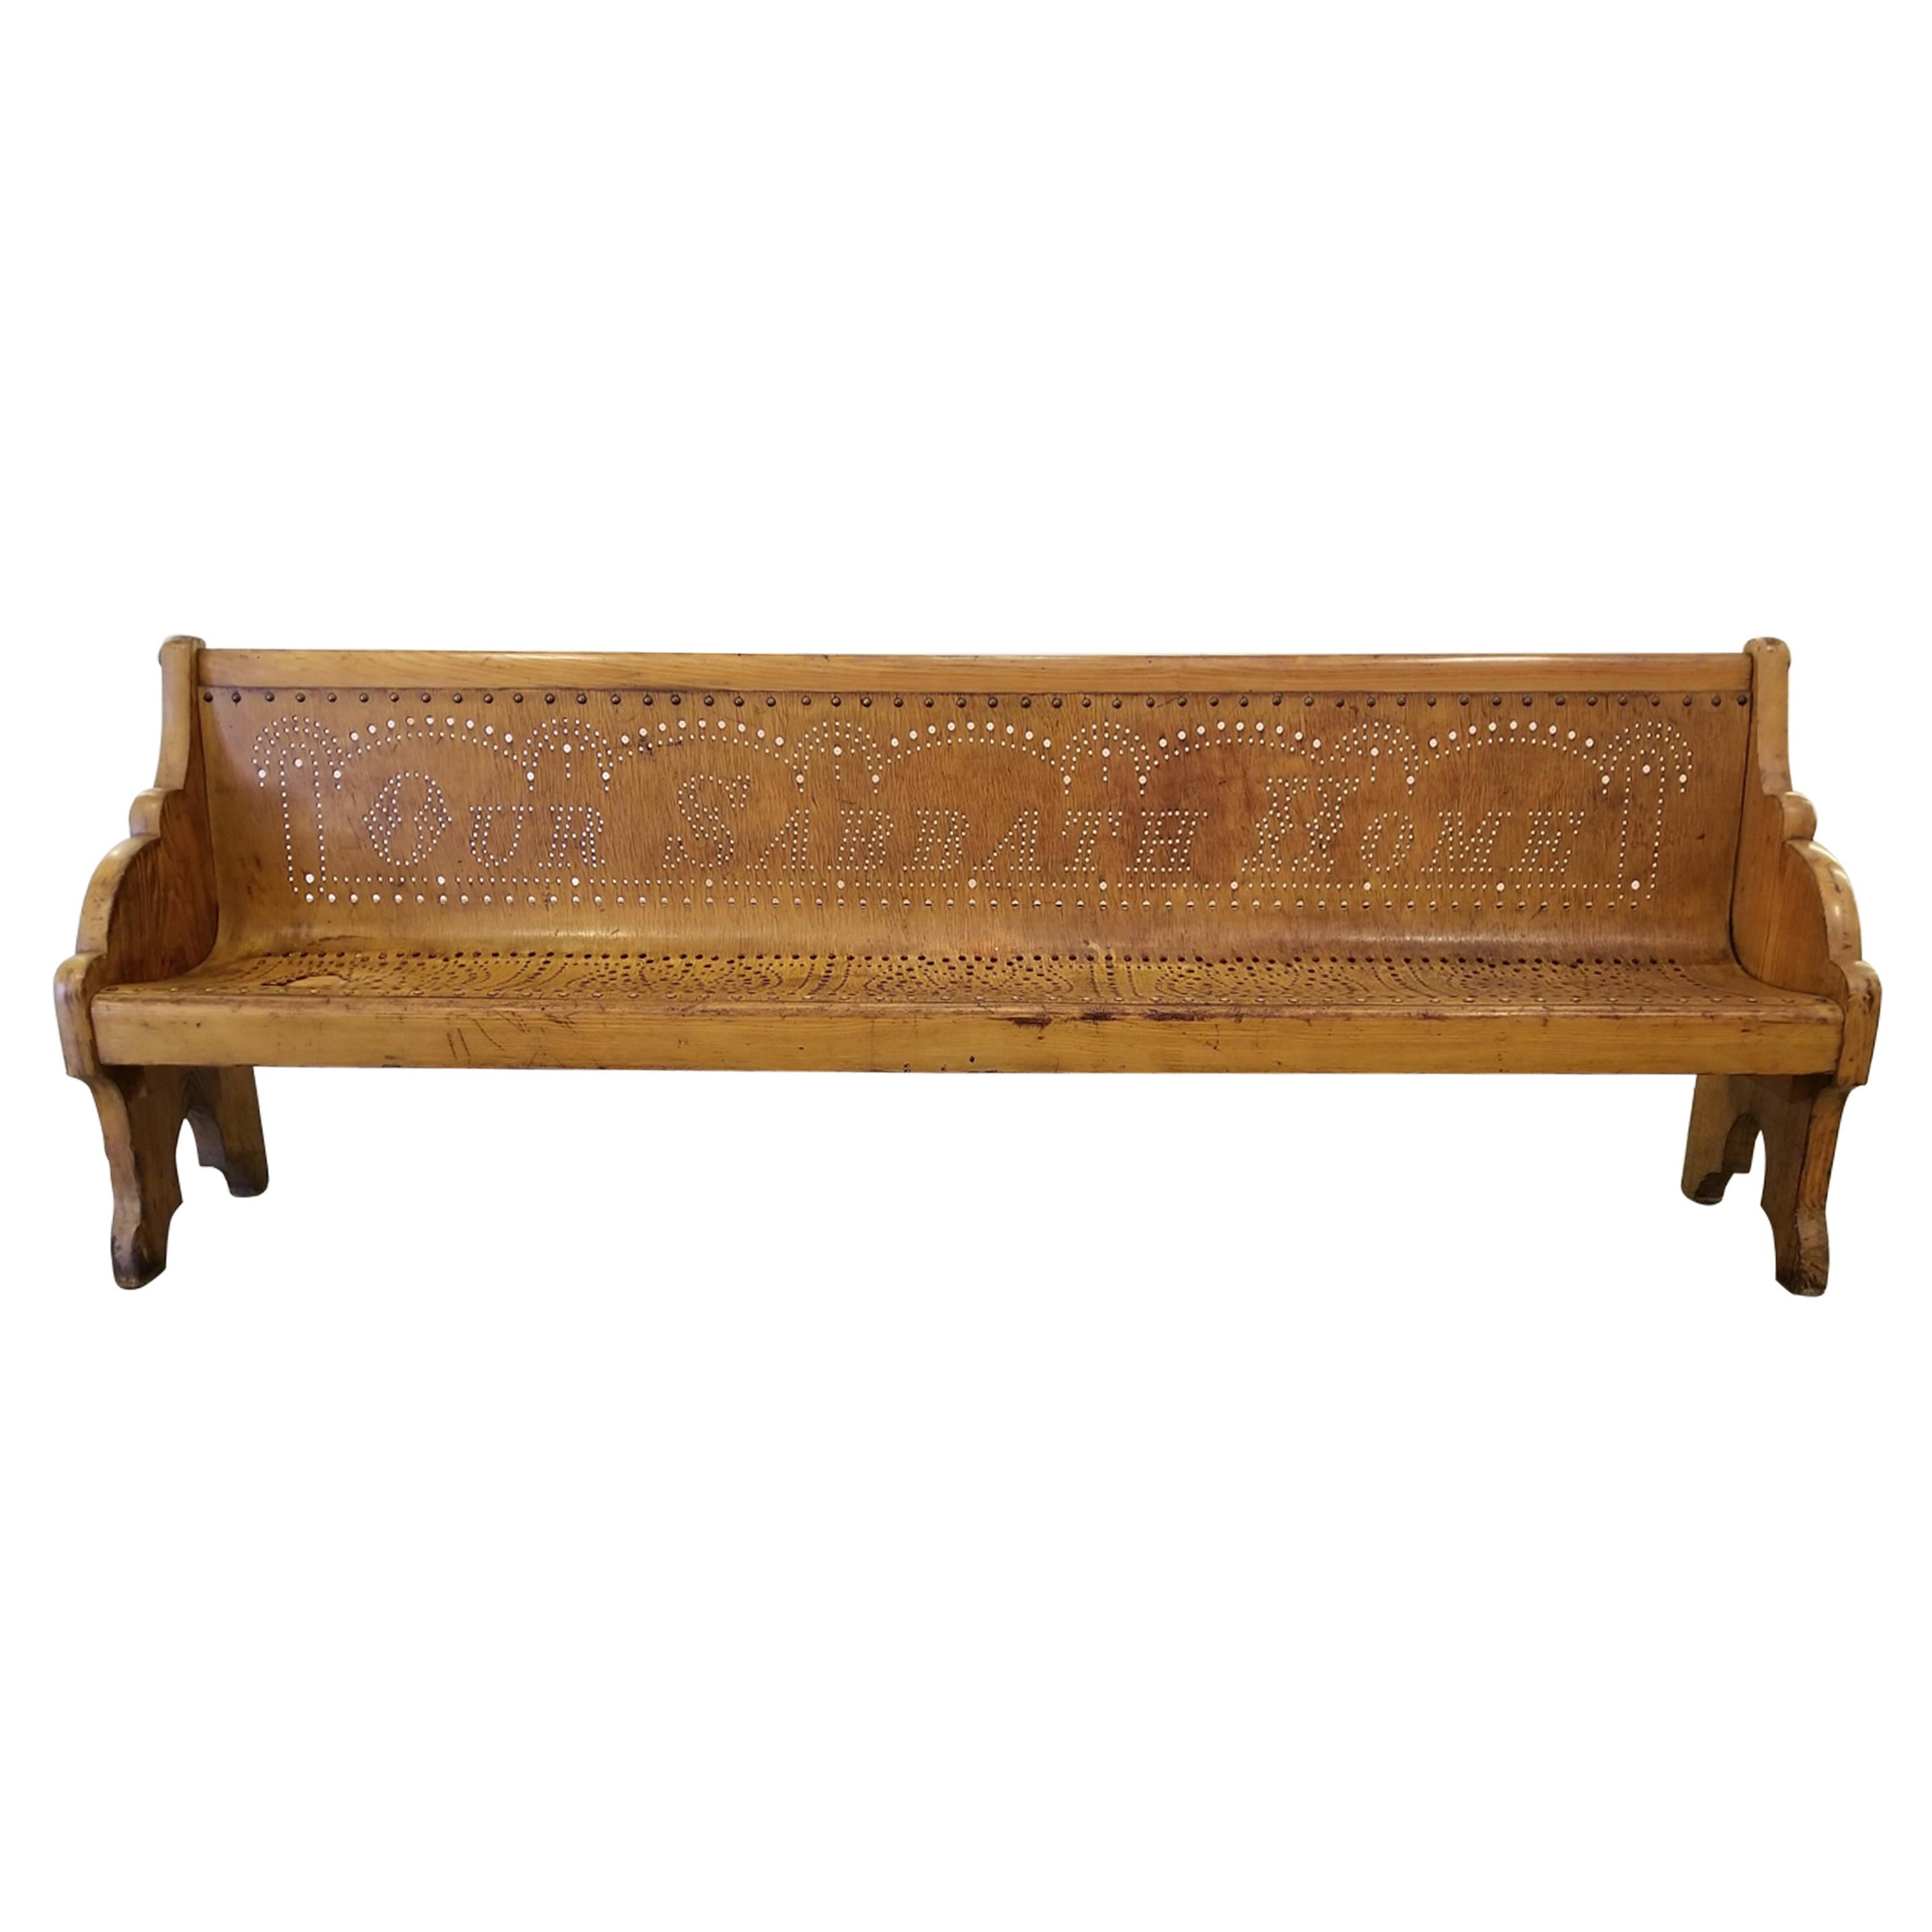 19th Century Children's Church Pew or Bench For Sale